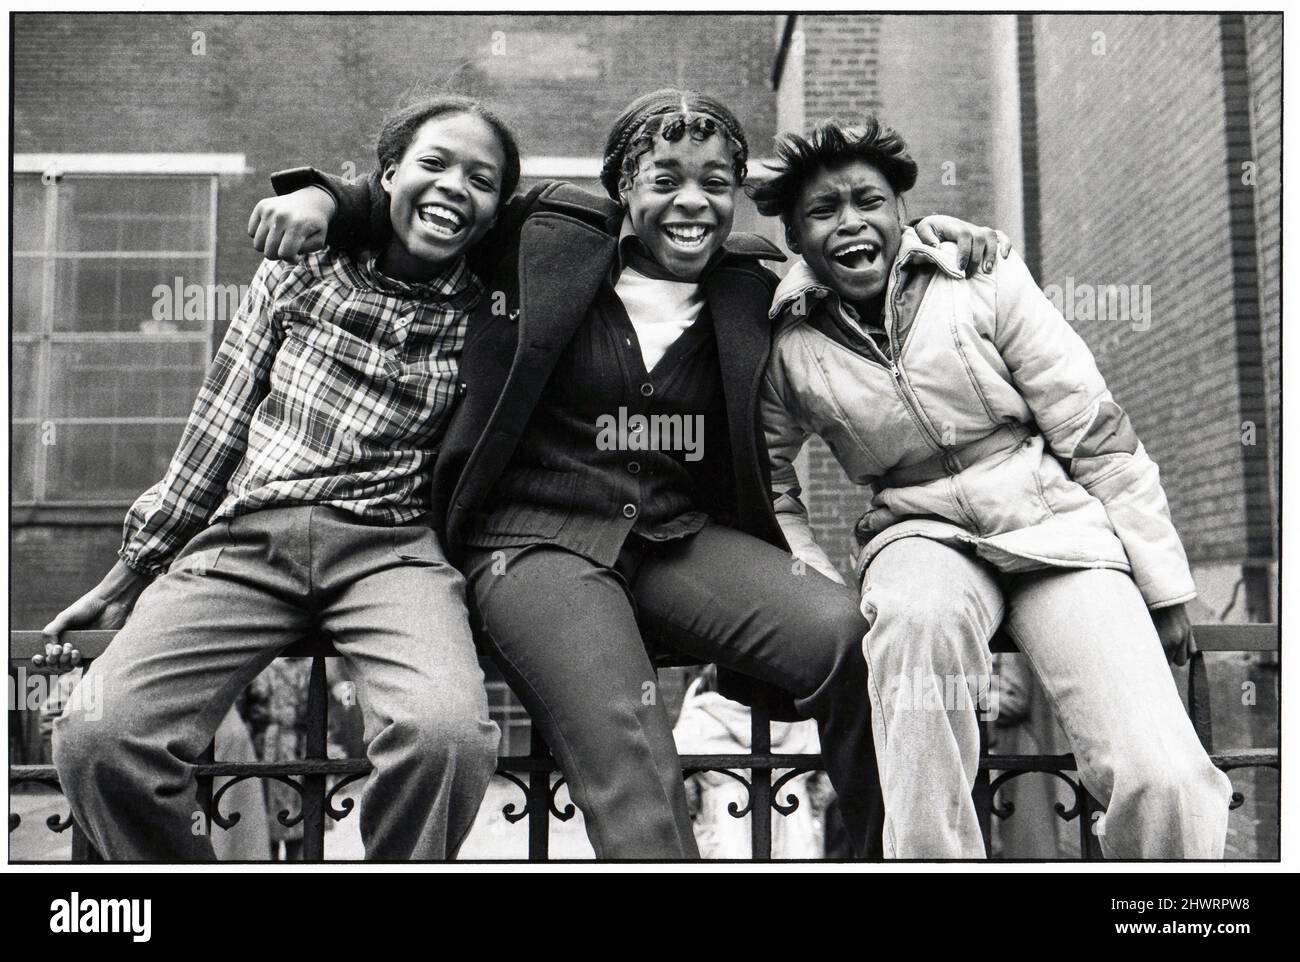 Three very happy teenagers pose for a photo on a schoolyard fence in Brooklyn, New York in 1981. Stock Photo